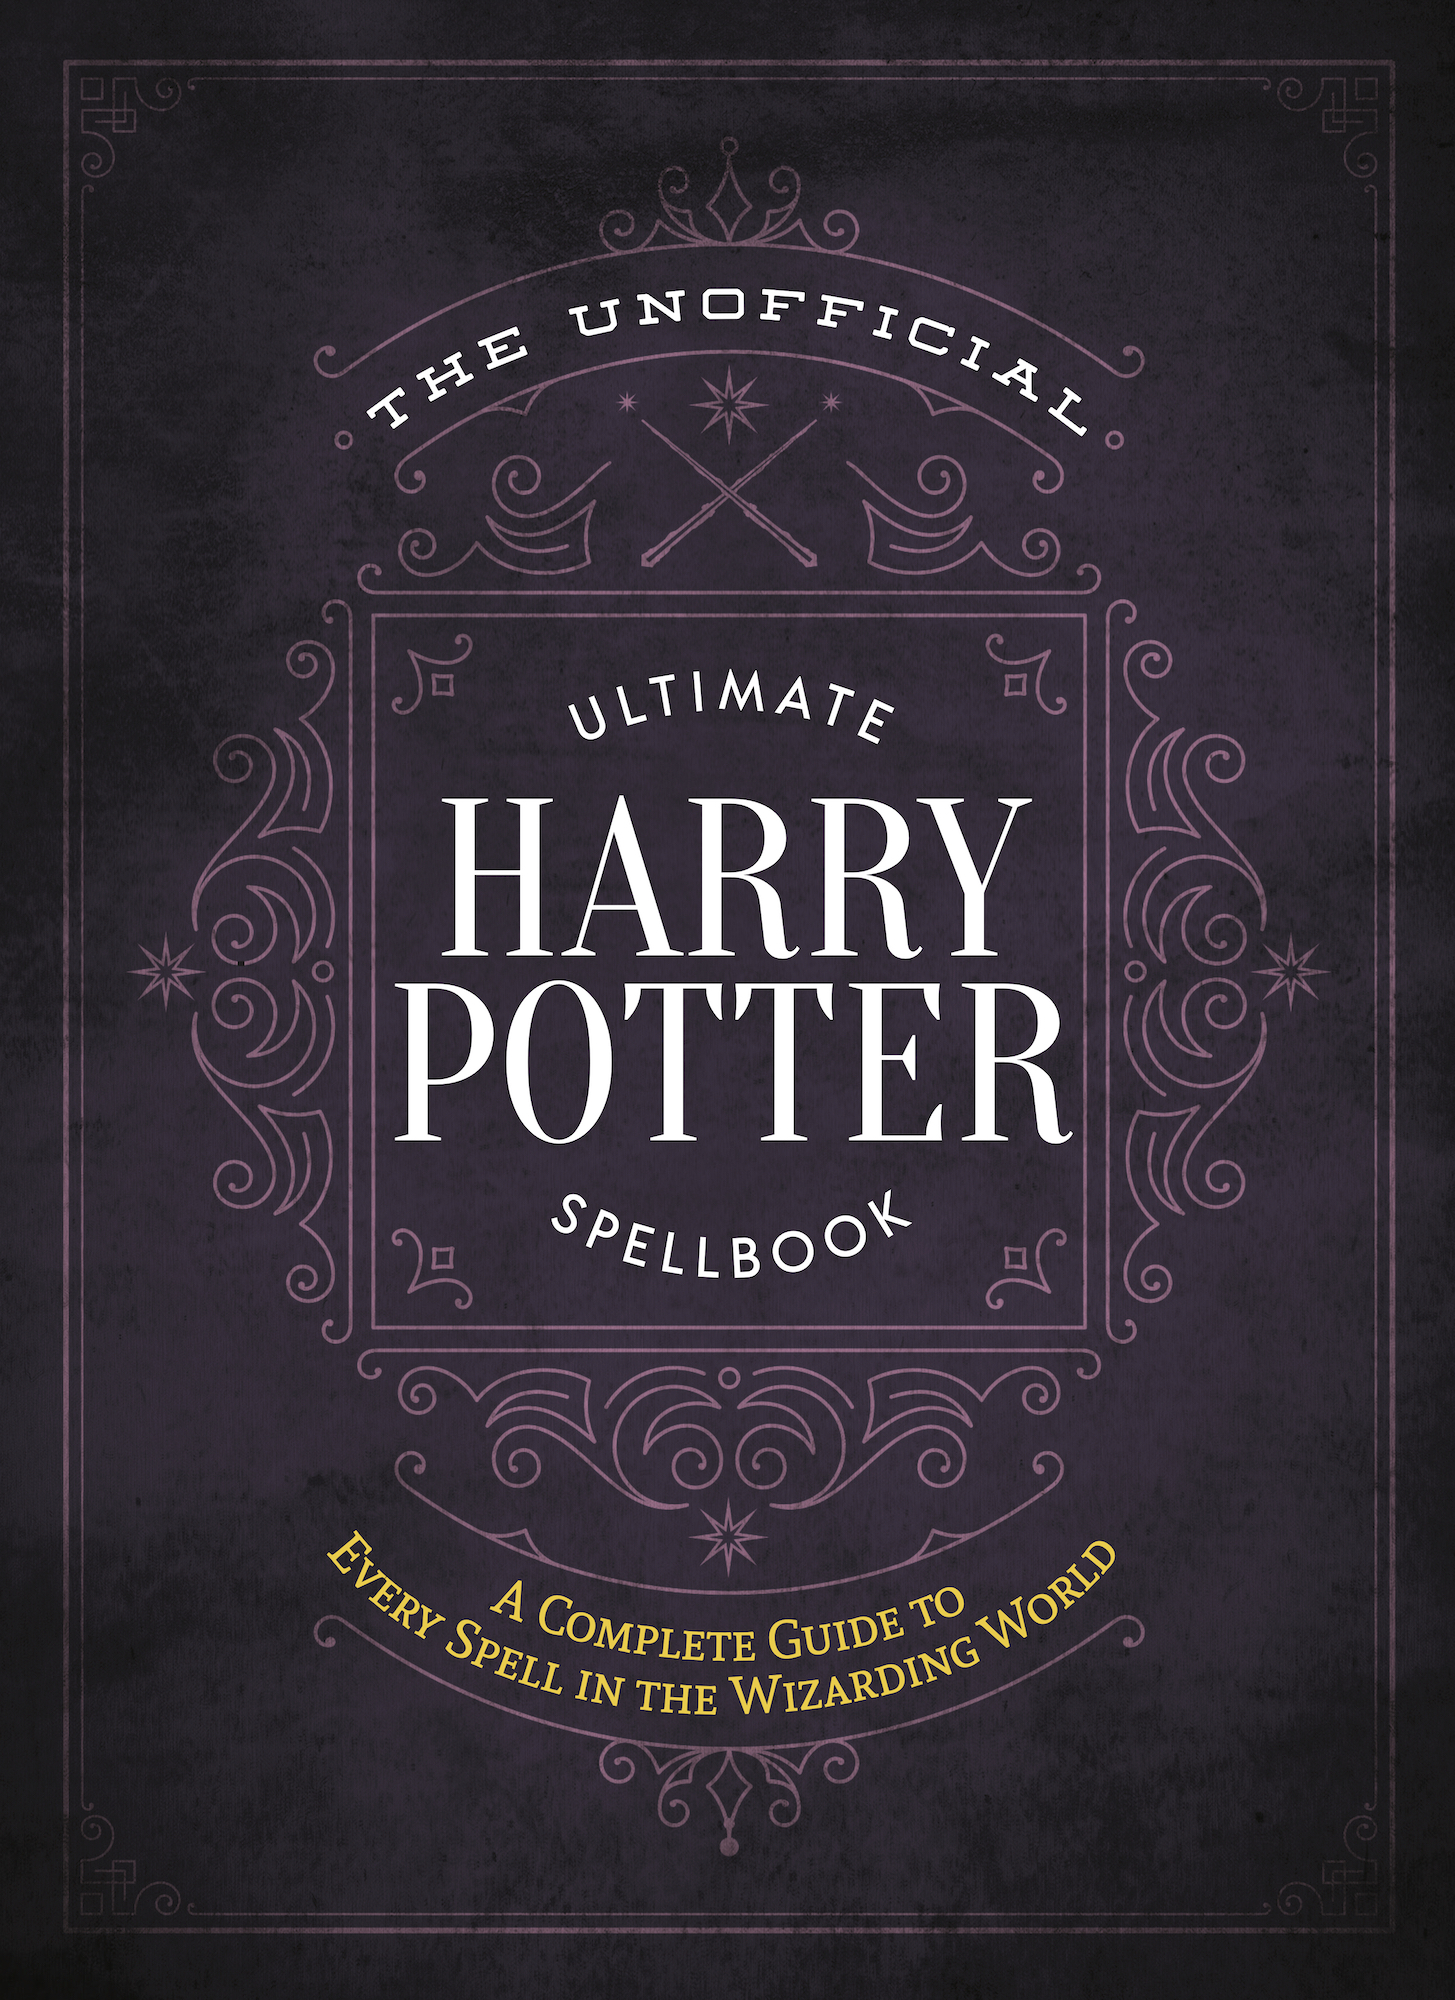 “The Unofficial Ultimate Harry Potter Spellbook”